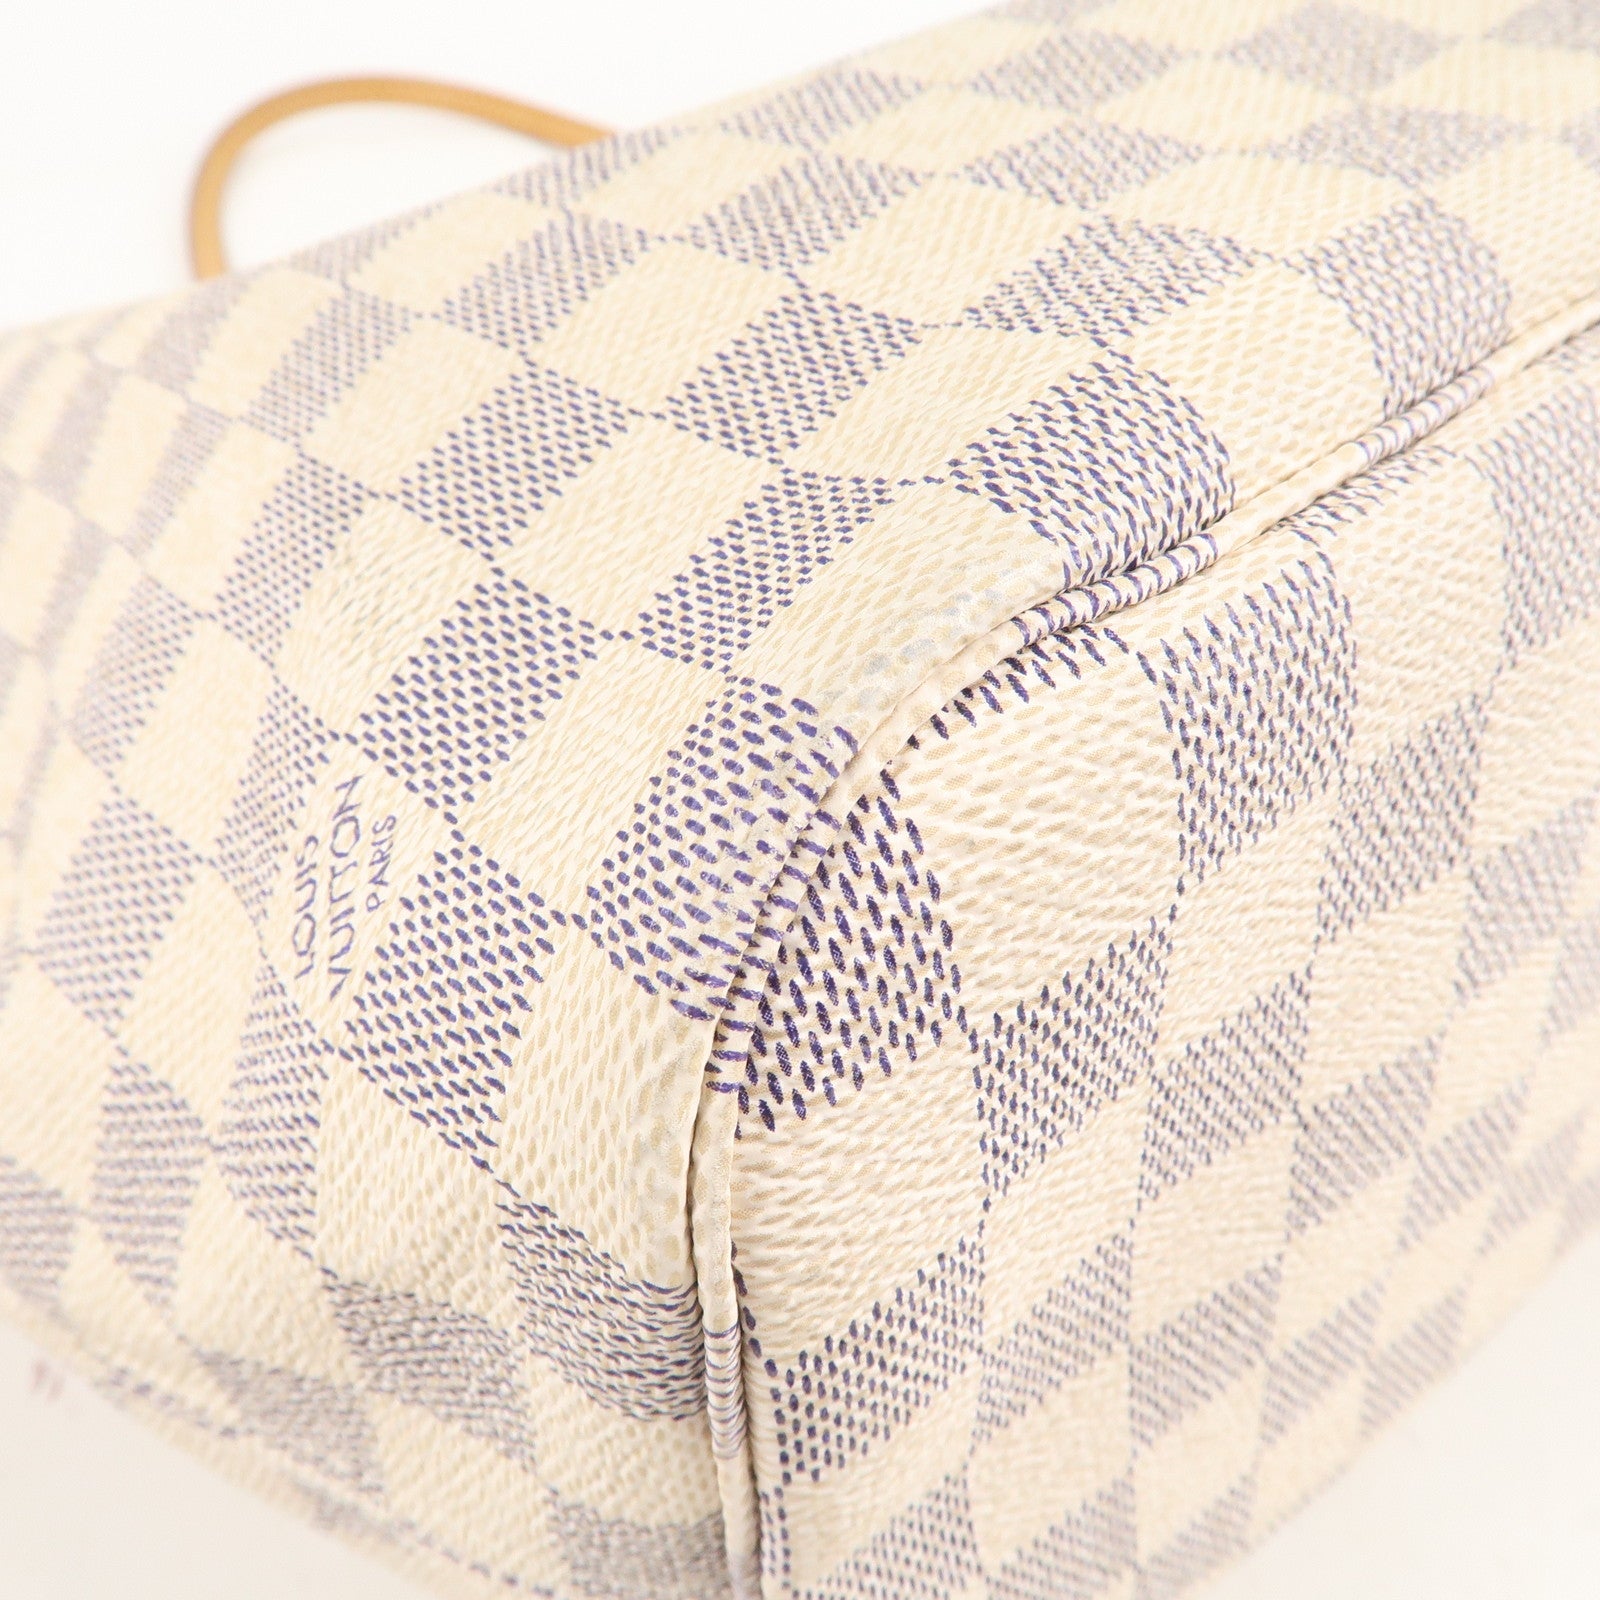 LOUIS VUITTON N51107 NEVERFULL DAMIER AZUR USED TOTE BAG LV A0323